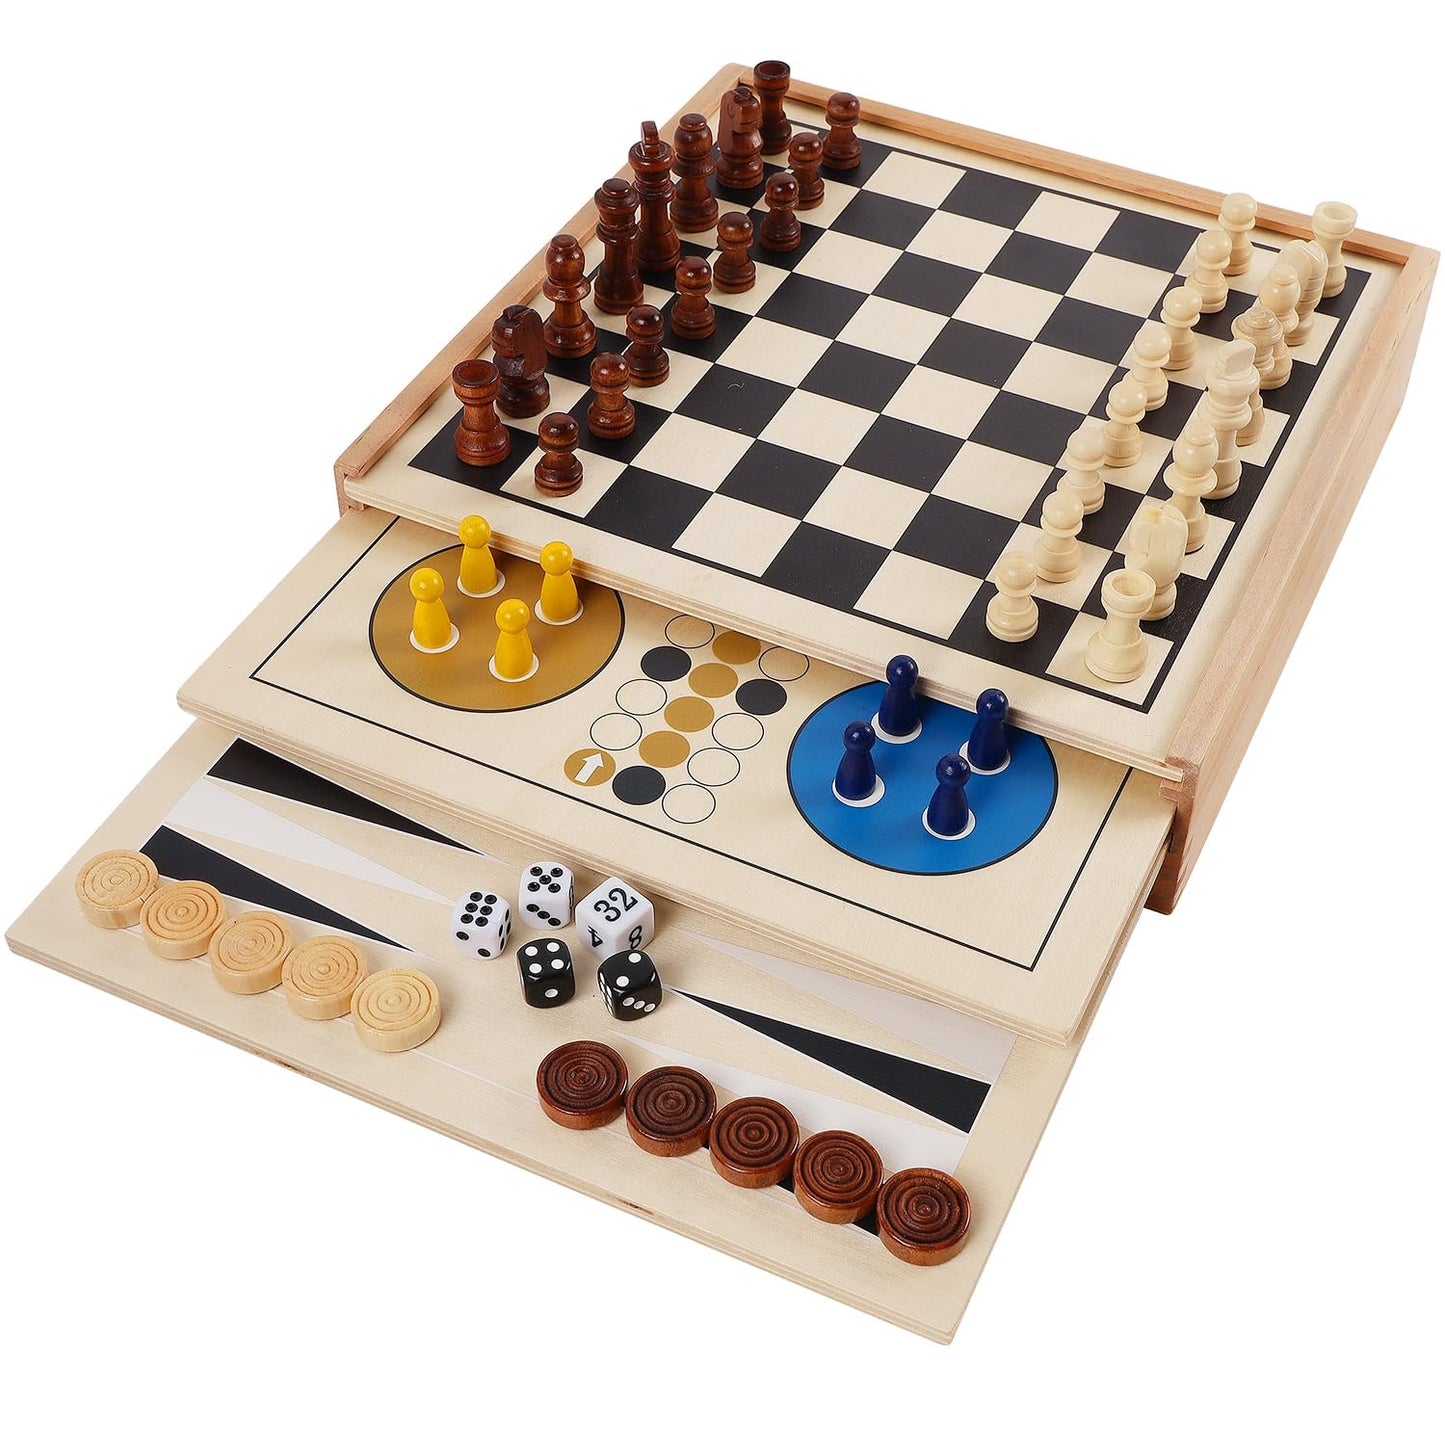 Juegoal 7-in-1 Wooden Board Game Set for Kids Adults, Tabletop Combo Classic Travel Portable Board Games (Chess, Checkers, Chinese Checkers, Backgammon, Parcheesi, Snakes and Ladders, Tic Tac Toe) - amzGamess